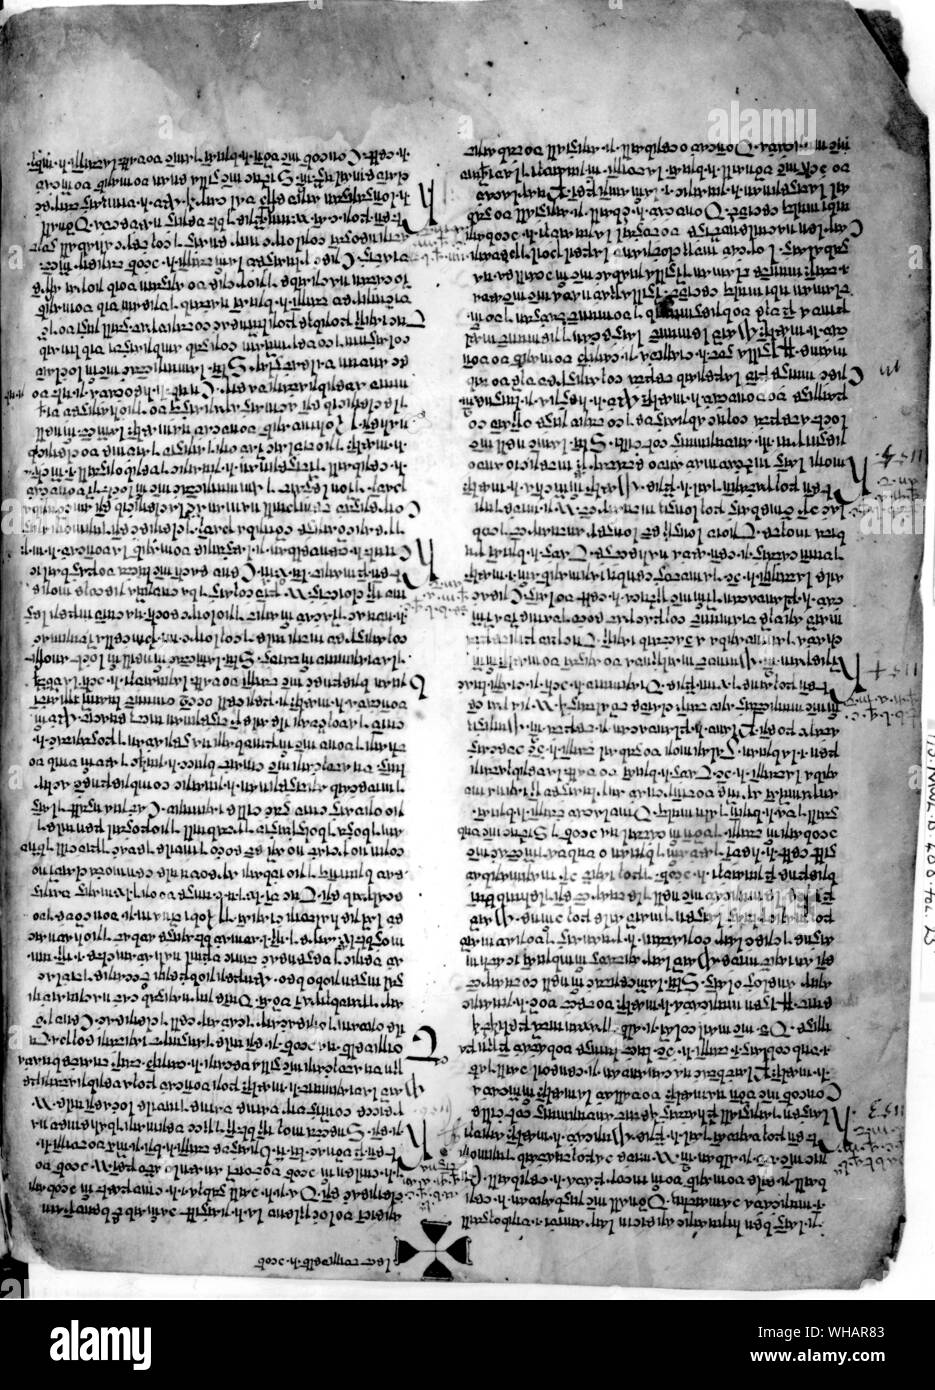 Annals of Tigernach are the remnants of a chronicle (written in a mixture of Latin and Irish), traditionally associated with Tigernach hua Braein, Abbot of Clonmacnois, who died in 1088. Stock Photo